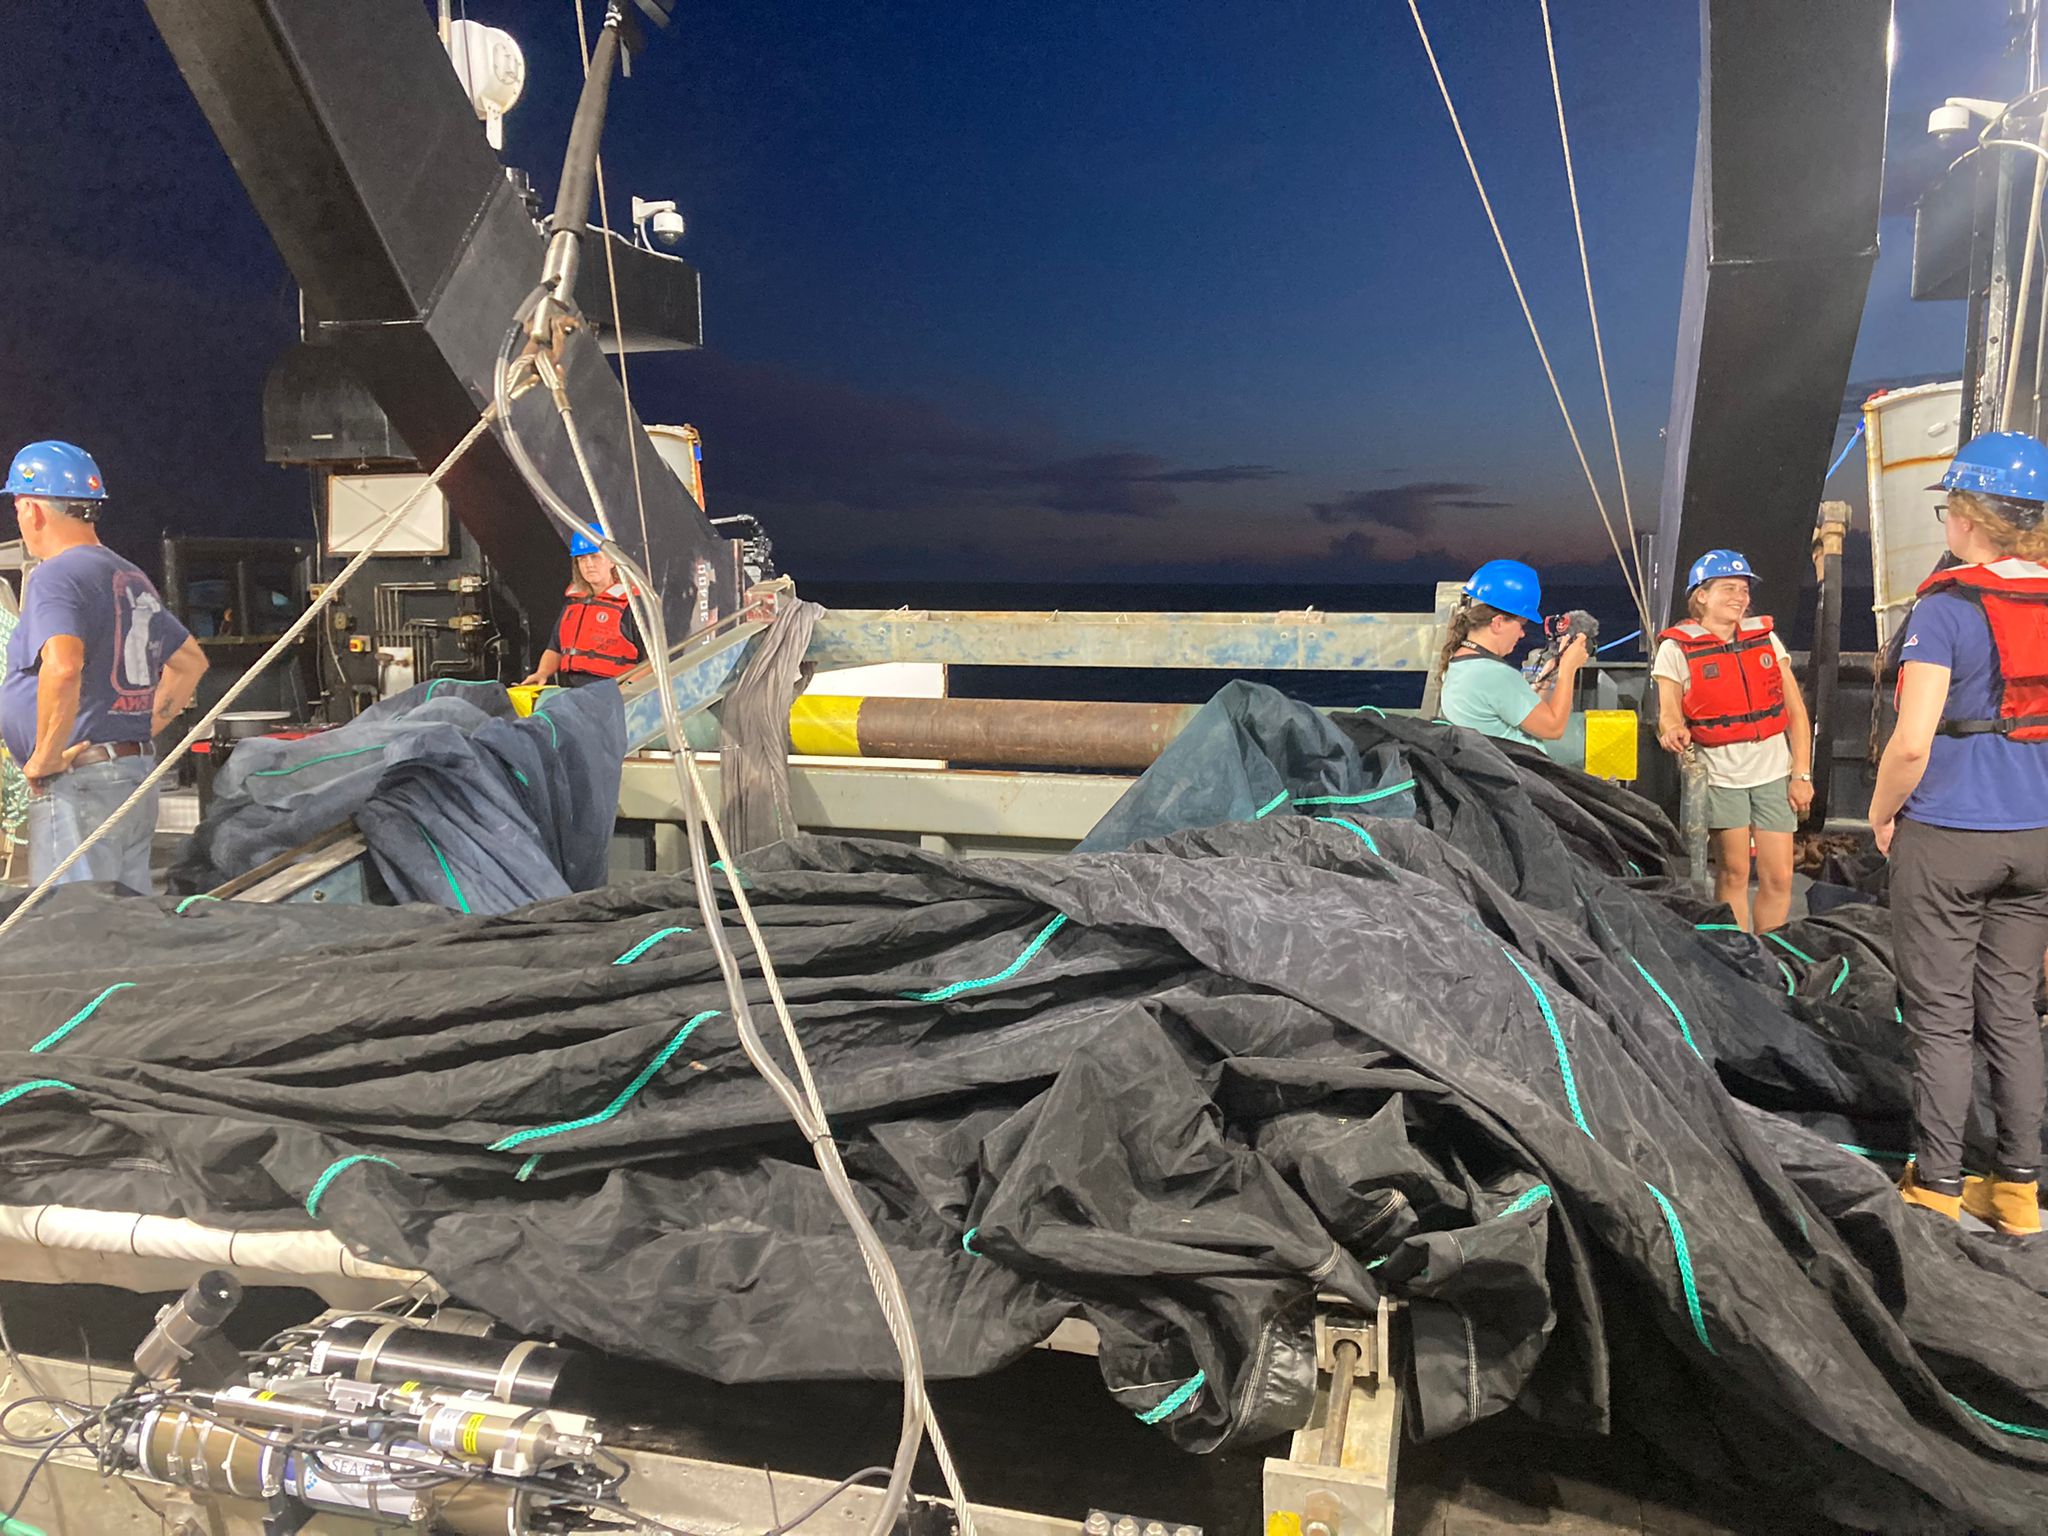 The MOCNESS awaits its first deployment. This high-tech tow net allows researchers to match what is found in nets at specific intervals with discrete properties of water at those depths. (Photo by Joel Llopiz © Woods Hole Oceanographic Institution)